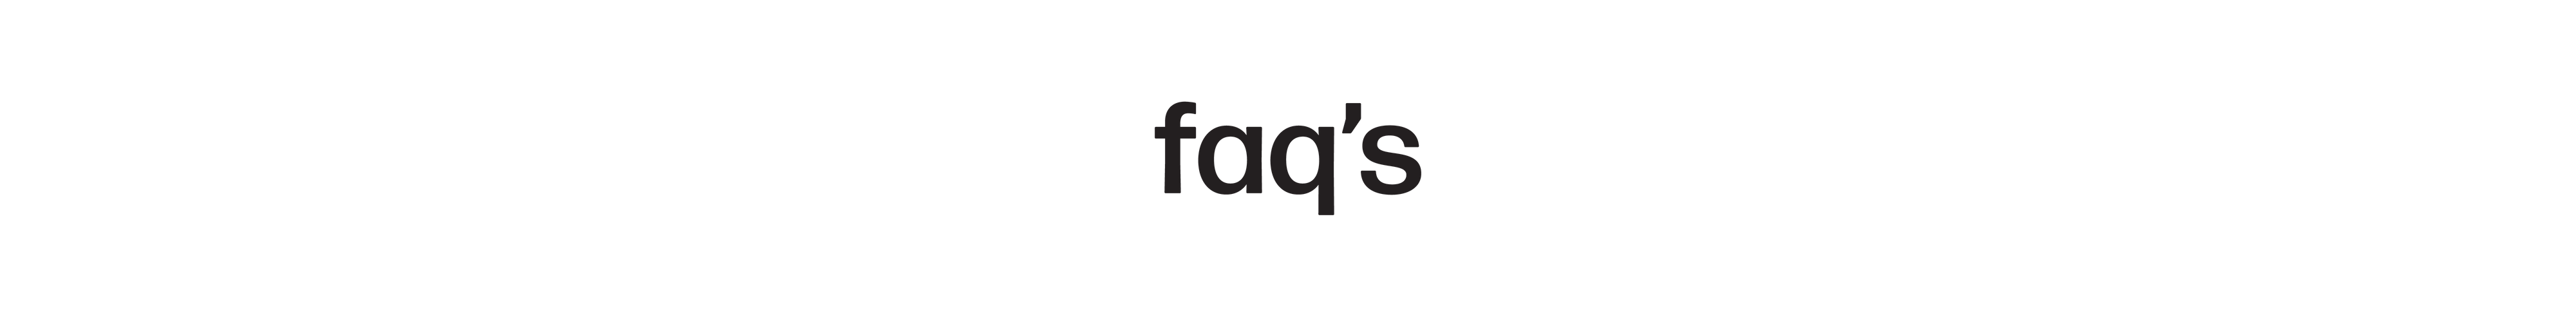 FAQs Page Header.png